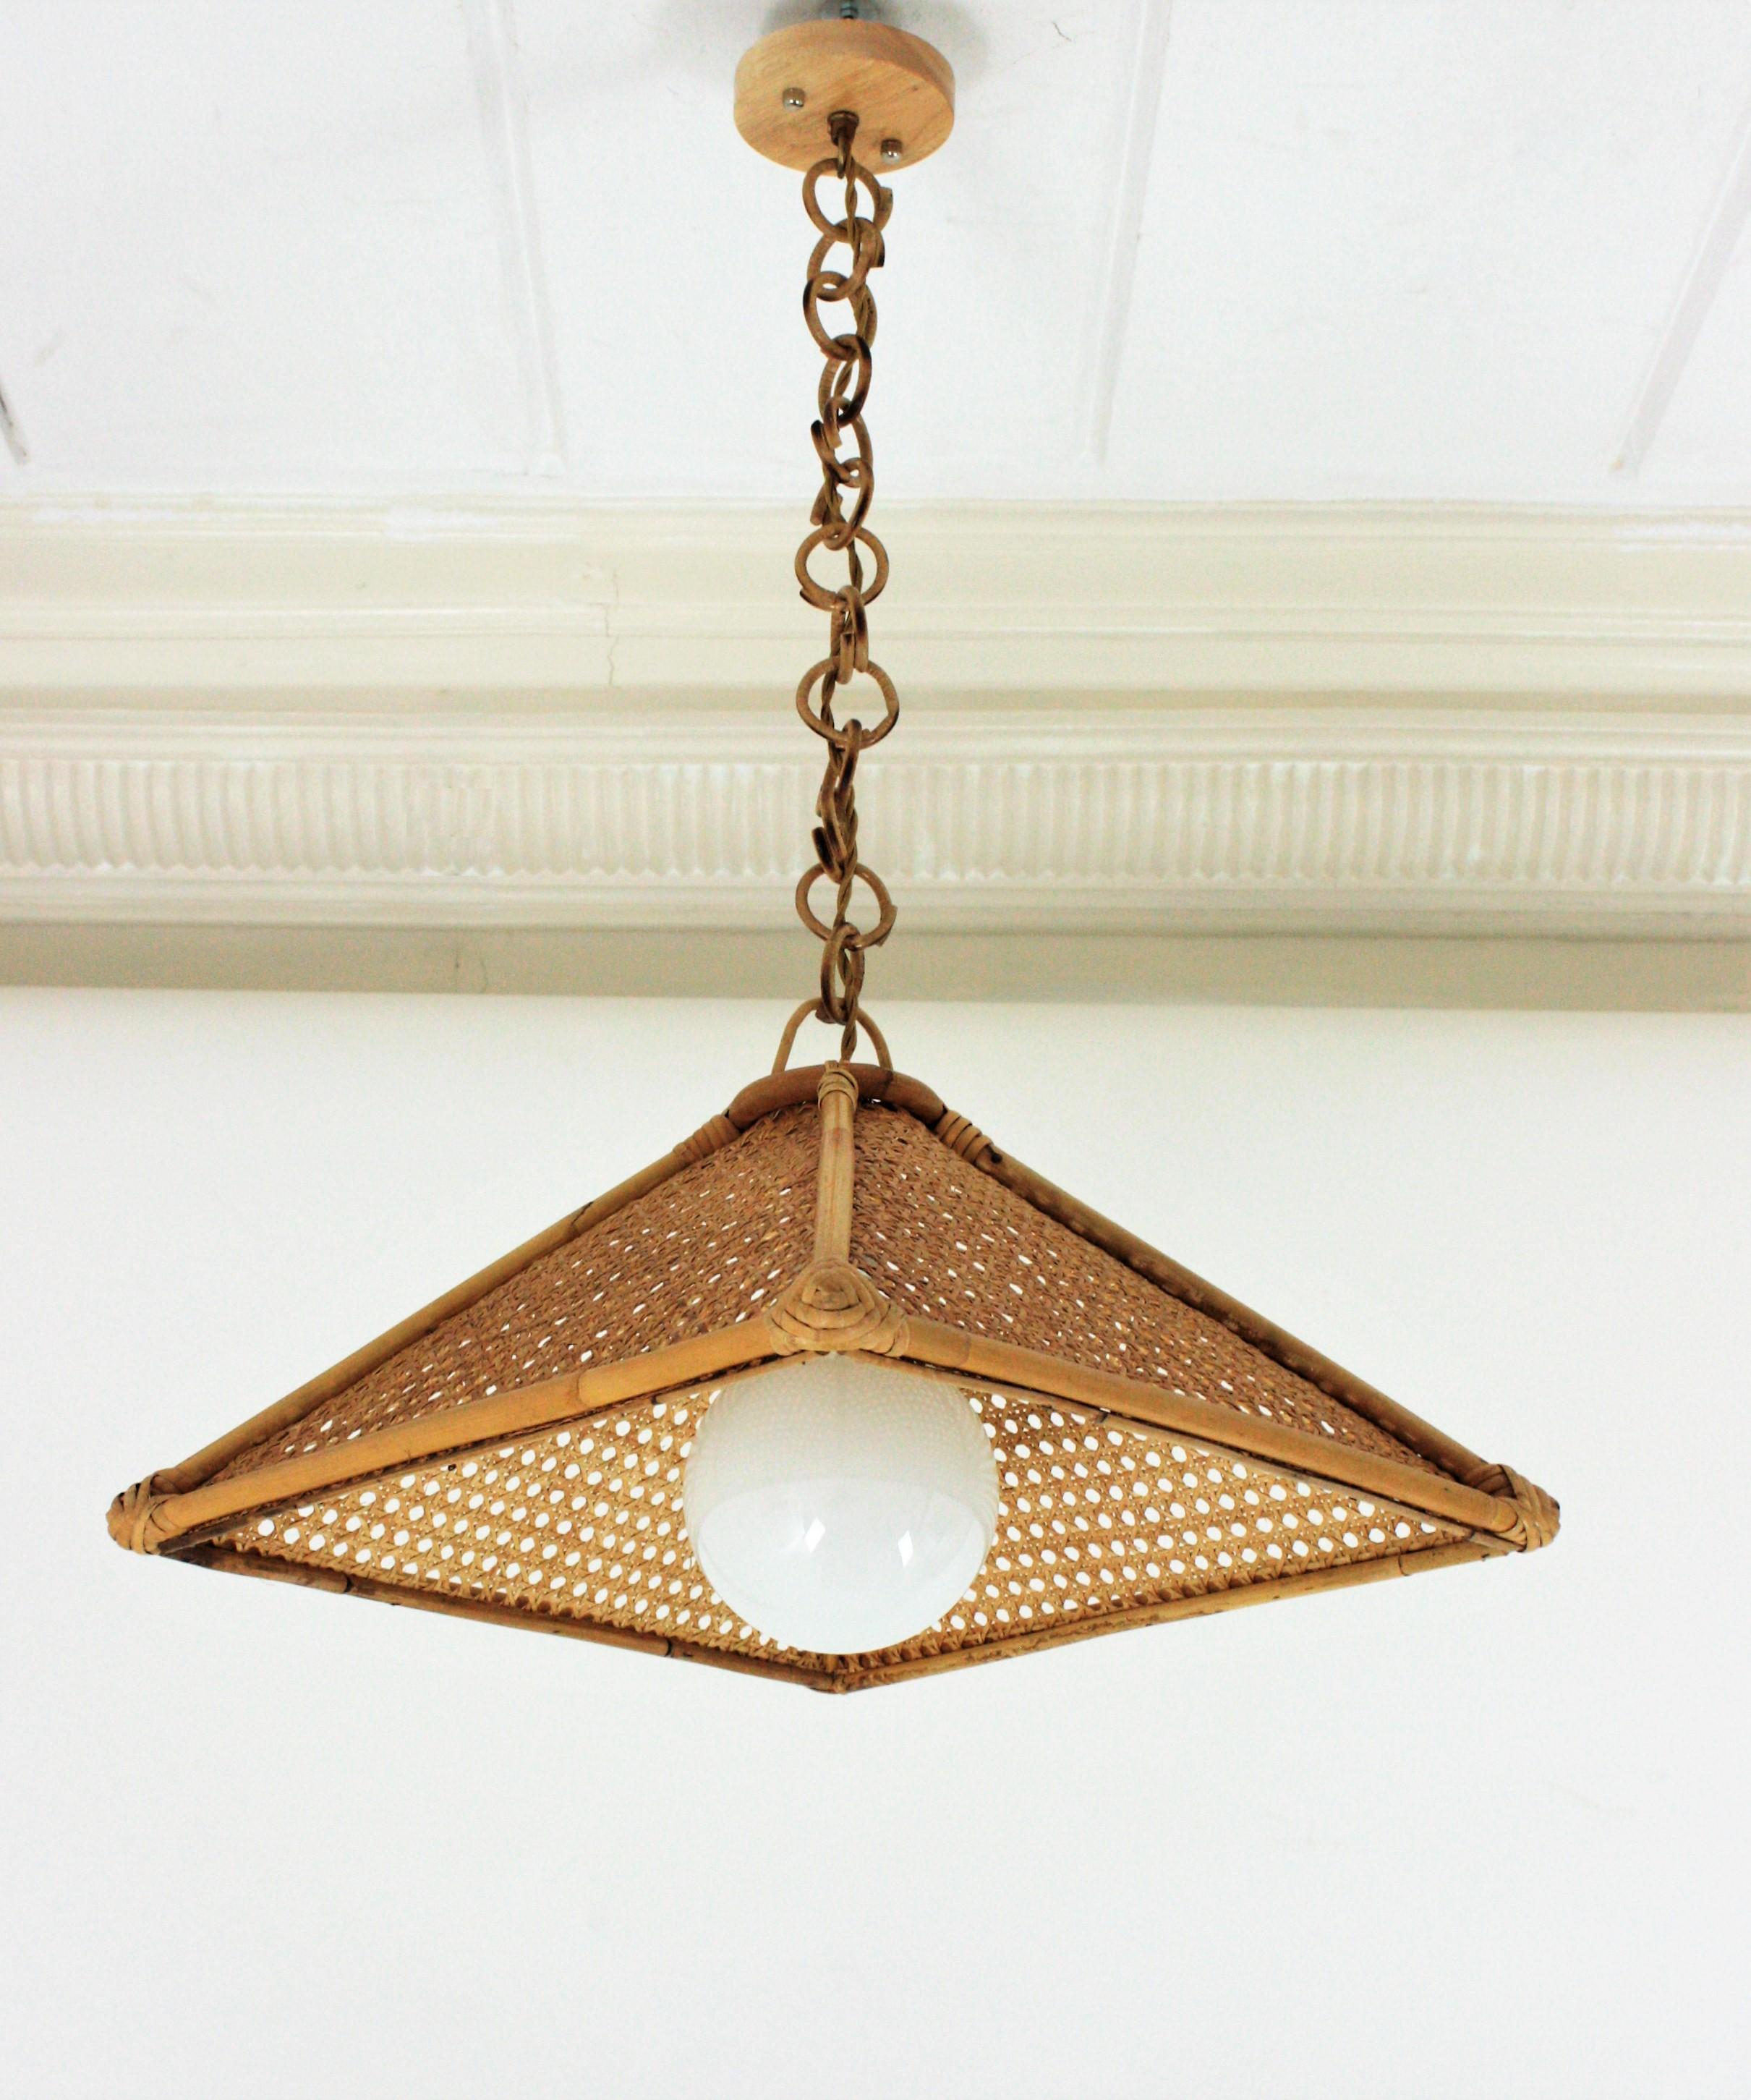 Mid-Century Modern woven wicker wire and rattan trapezoid shaped pendant / chandelier. Spain, 1960s
This beautiful suspension lamp features a trapezoid rattan structure with wicker wire panels. It hangs from a chain with round rattan links topped